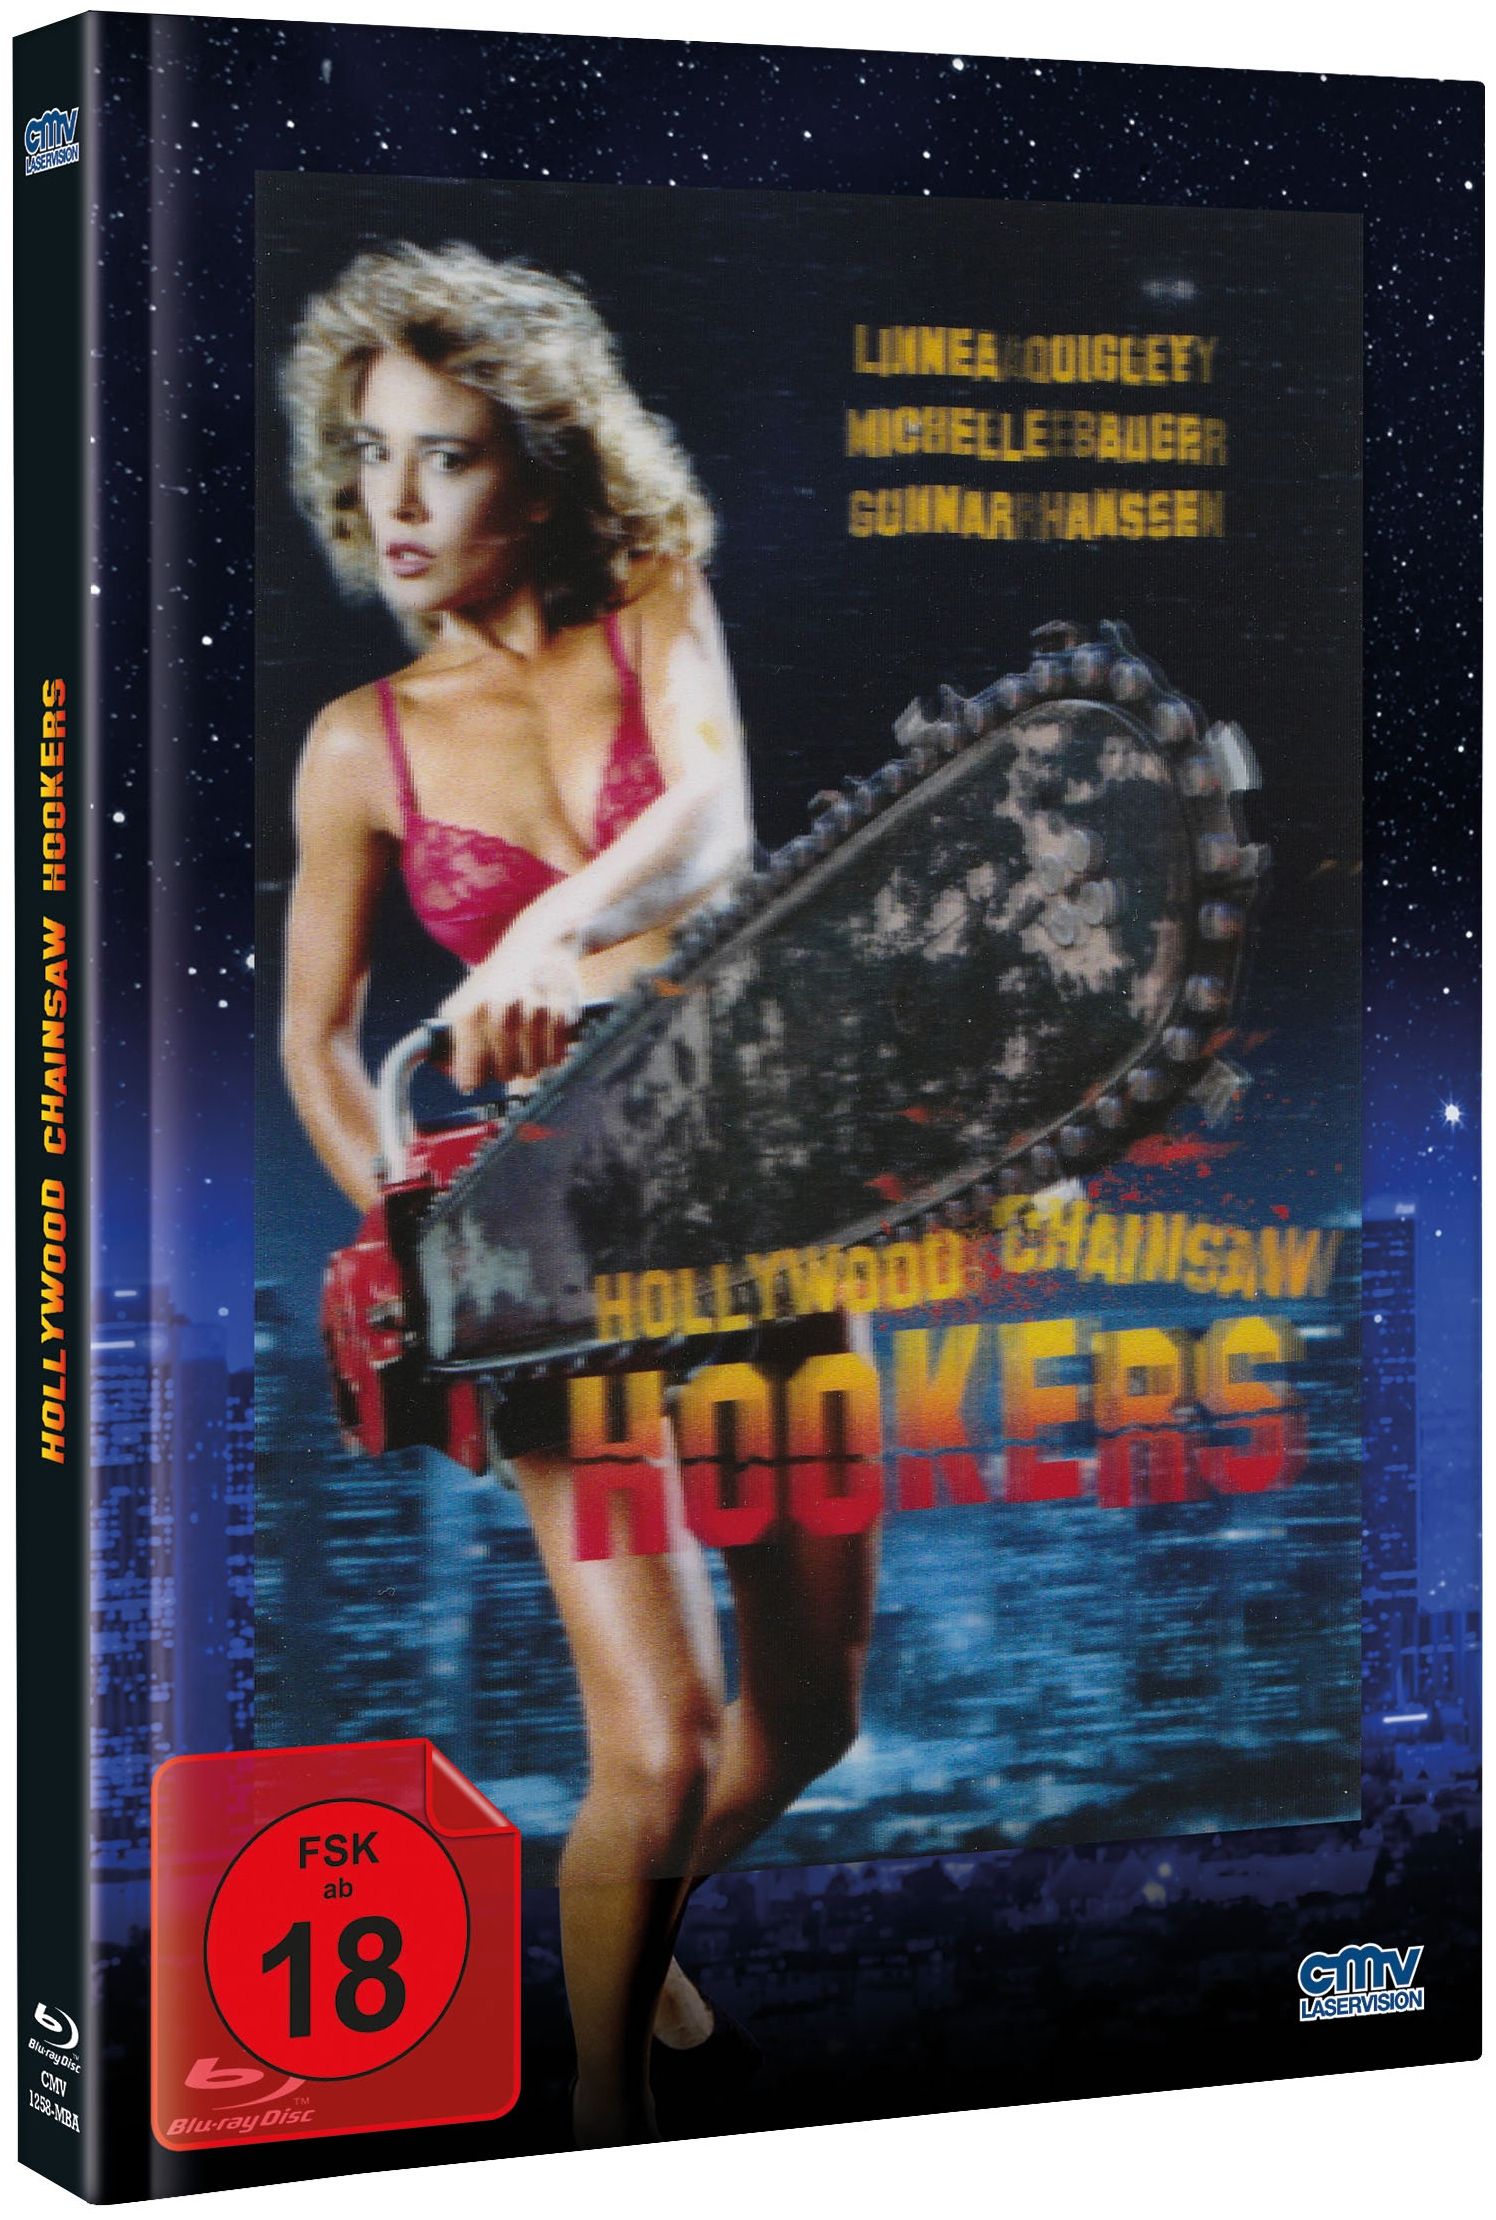 Hollywood Chainsaw Hookers (Lim. Uncut Mediabook - Cover A) (DVD + BLURAY)